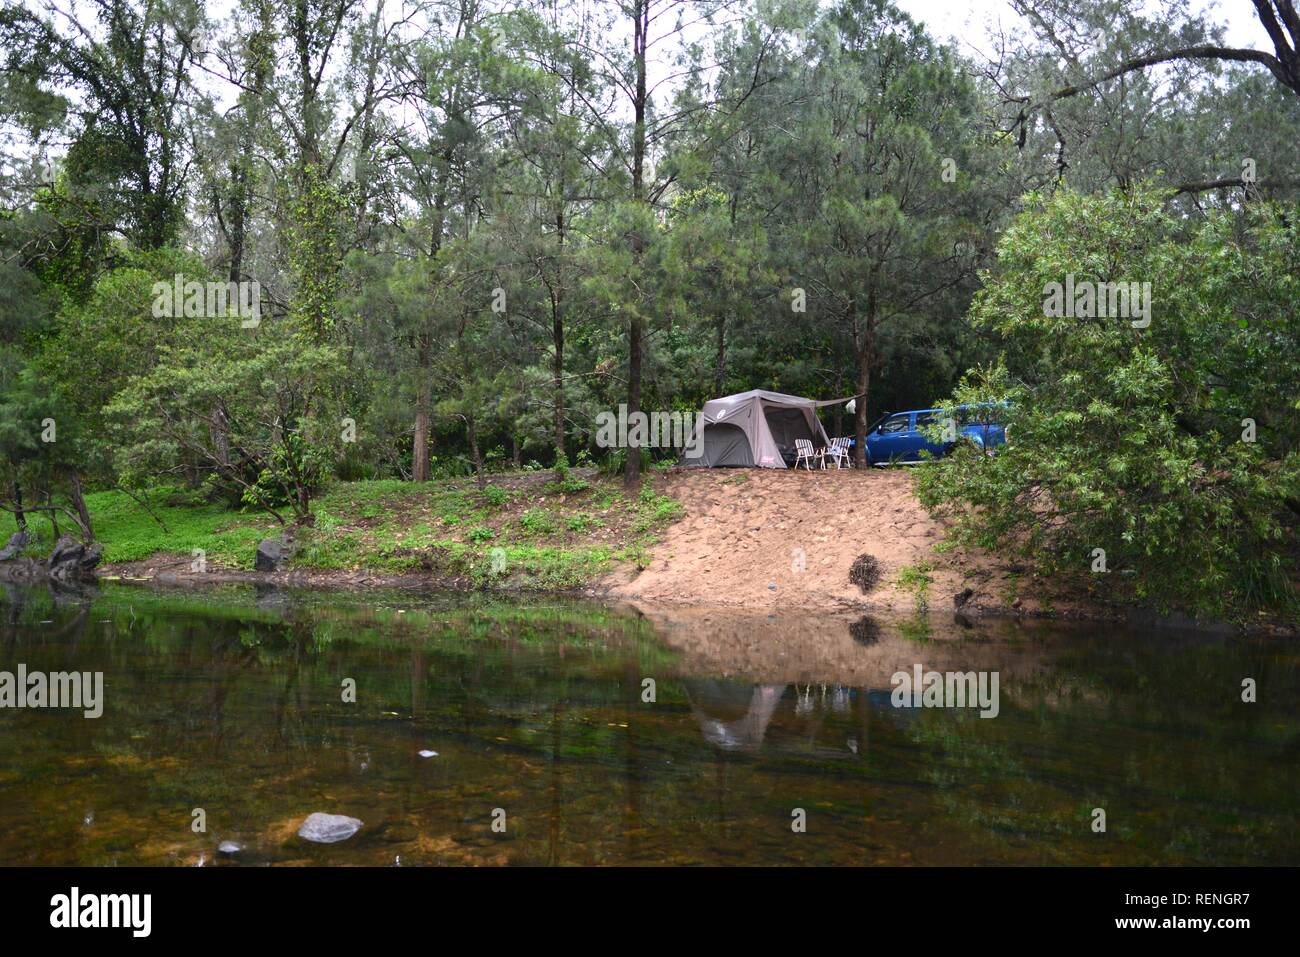 Camping next to Teemburra Creek at Captain's crossing, Mia Mia State Forest, Queensland, Australia Stock Photo